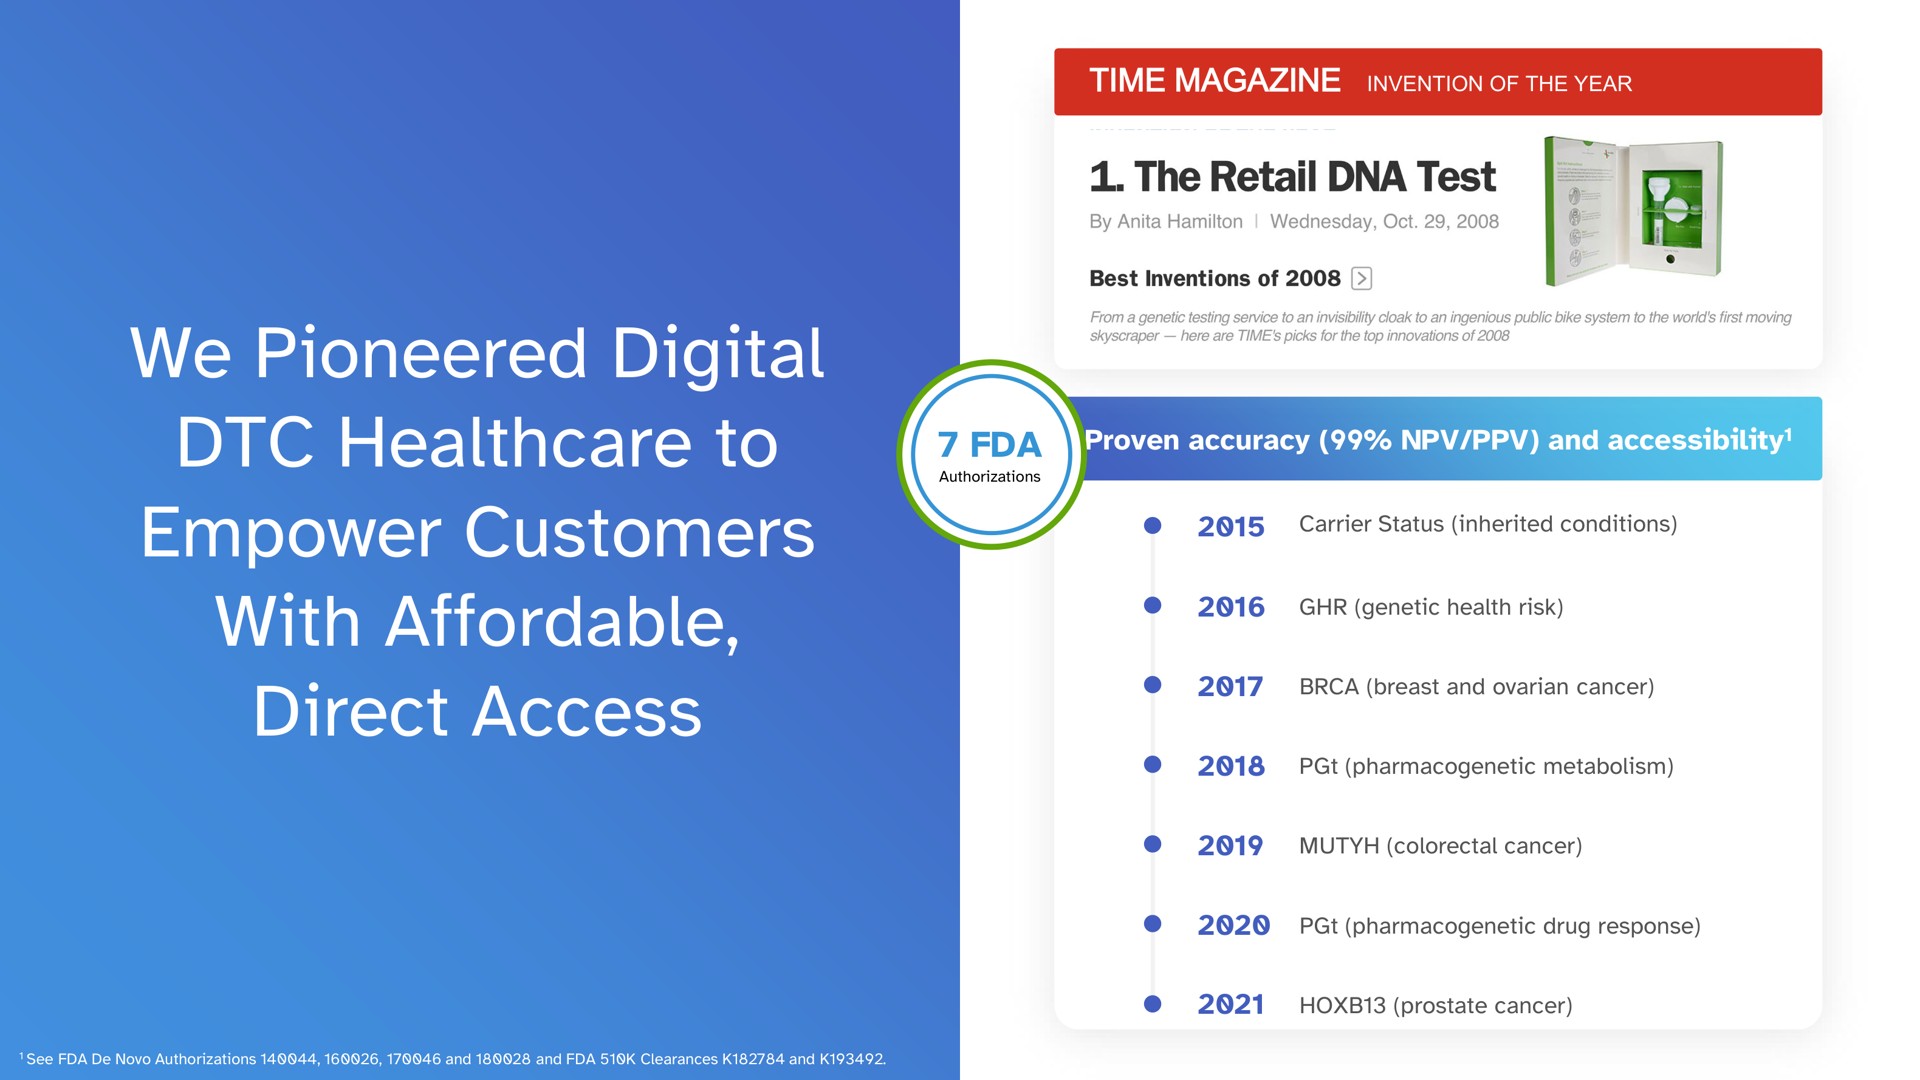 we pioneered digital to empower customers with affordable direct access | 23andMe